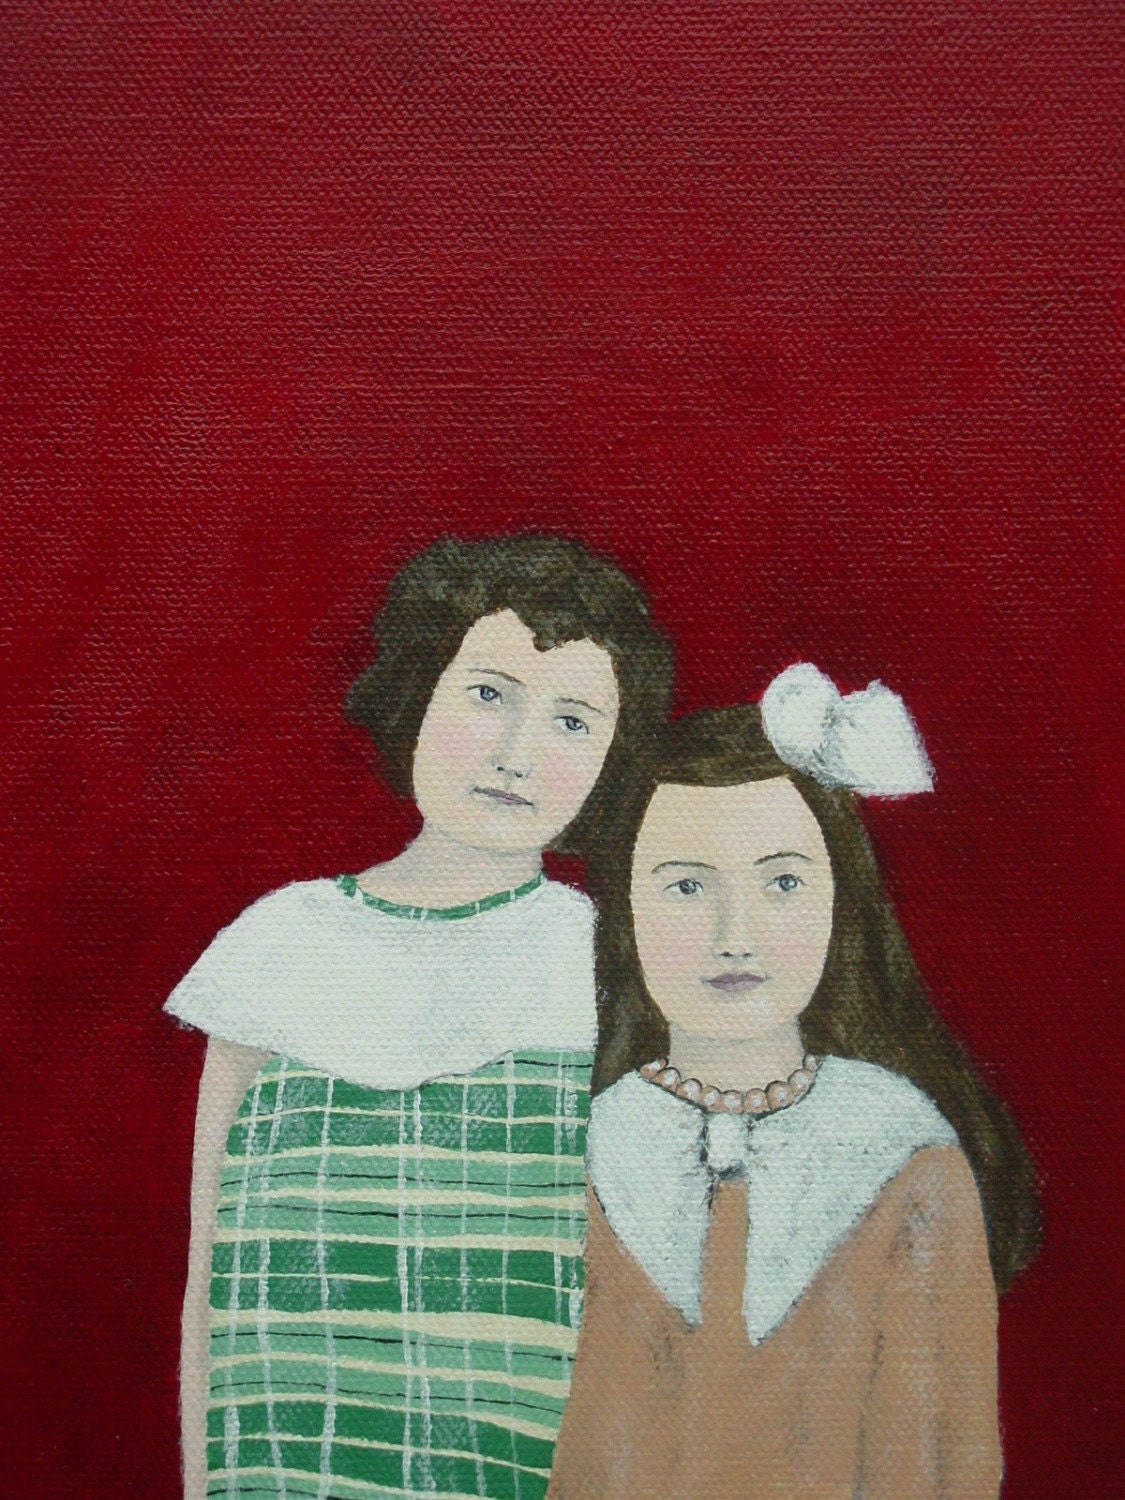 Girls in plaid and bows, Original Acrylic Painting